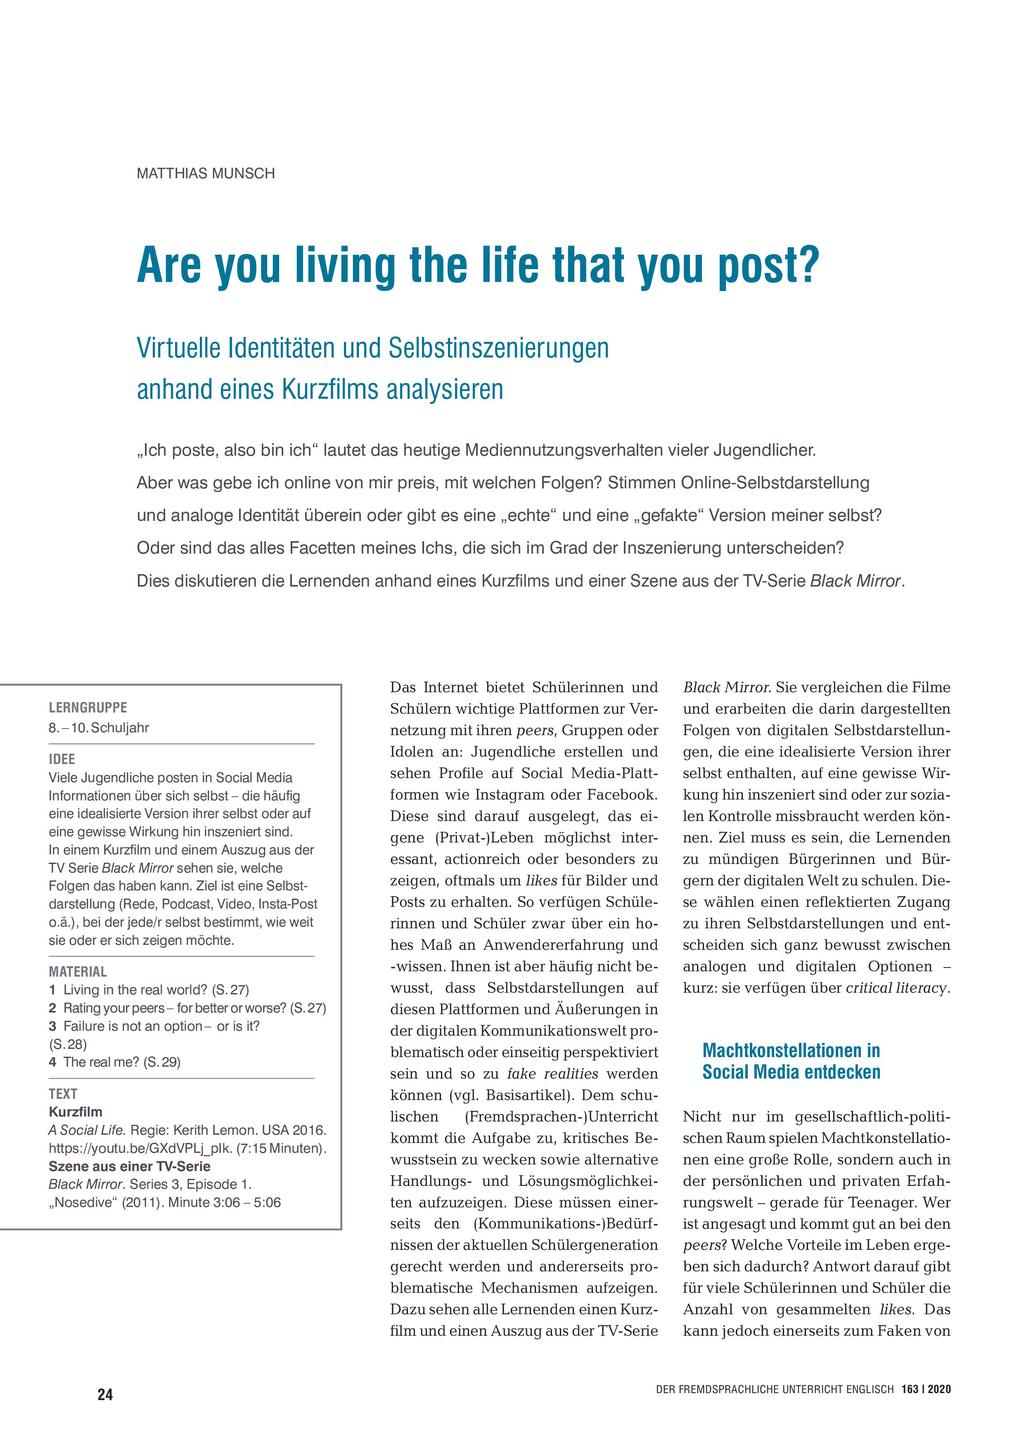 Are you living the life that you post? Preview 1